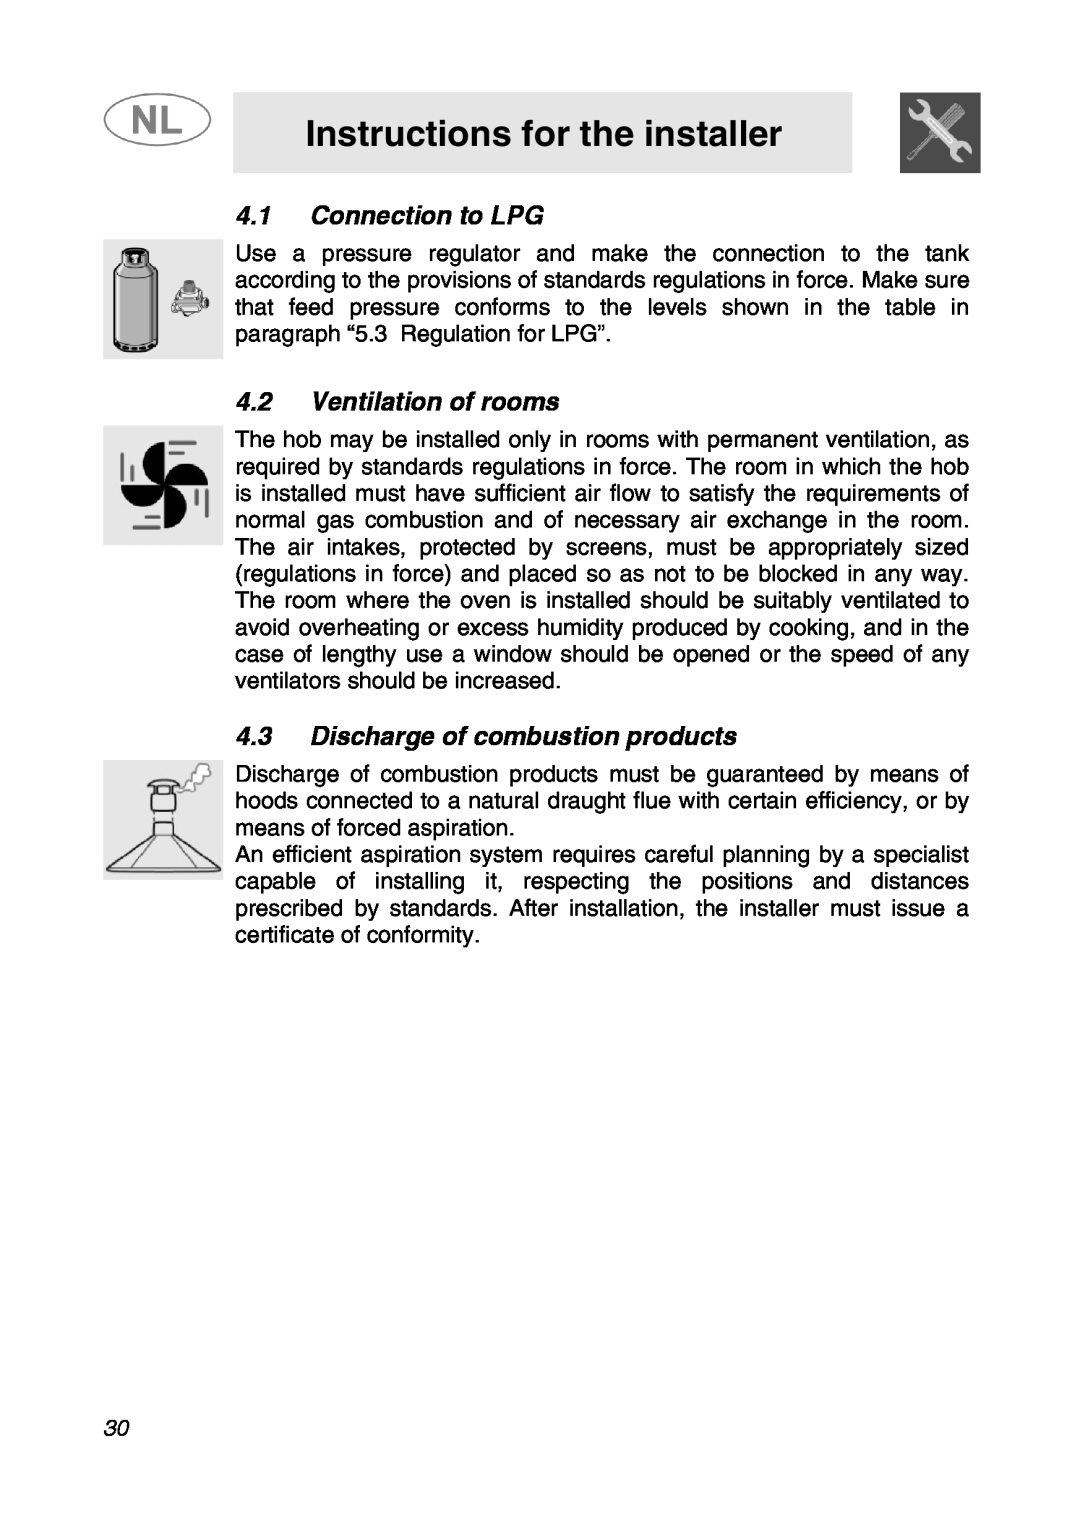 Smeg GKC95-3 Connection to LPG, Ventilation of rooms, Discharge of combustion products, Instructions for the installer 